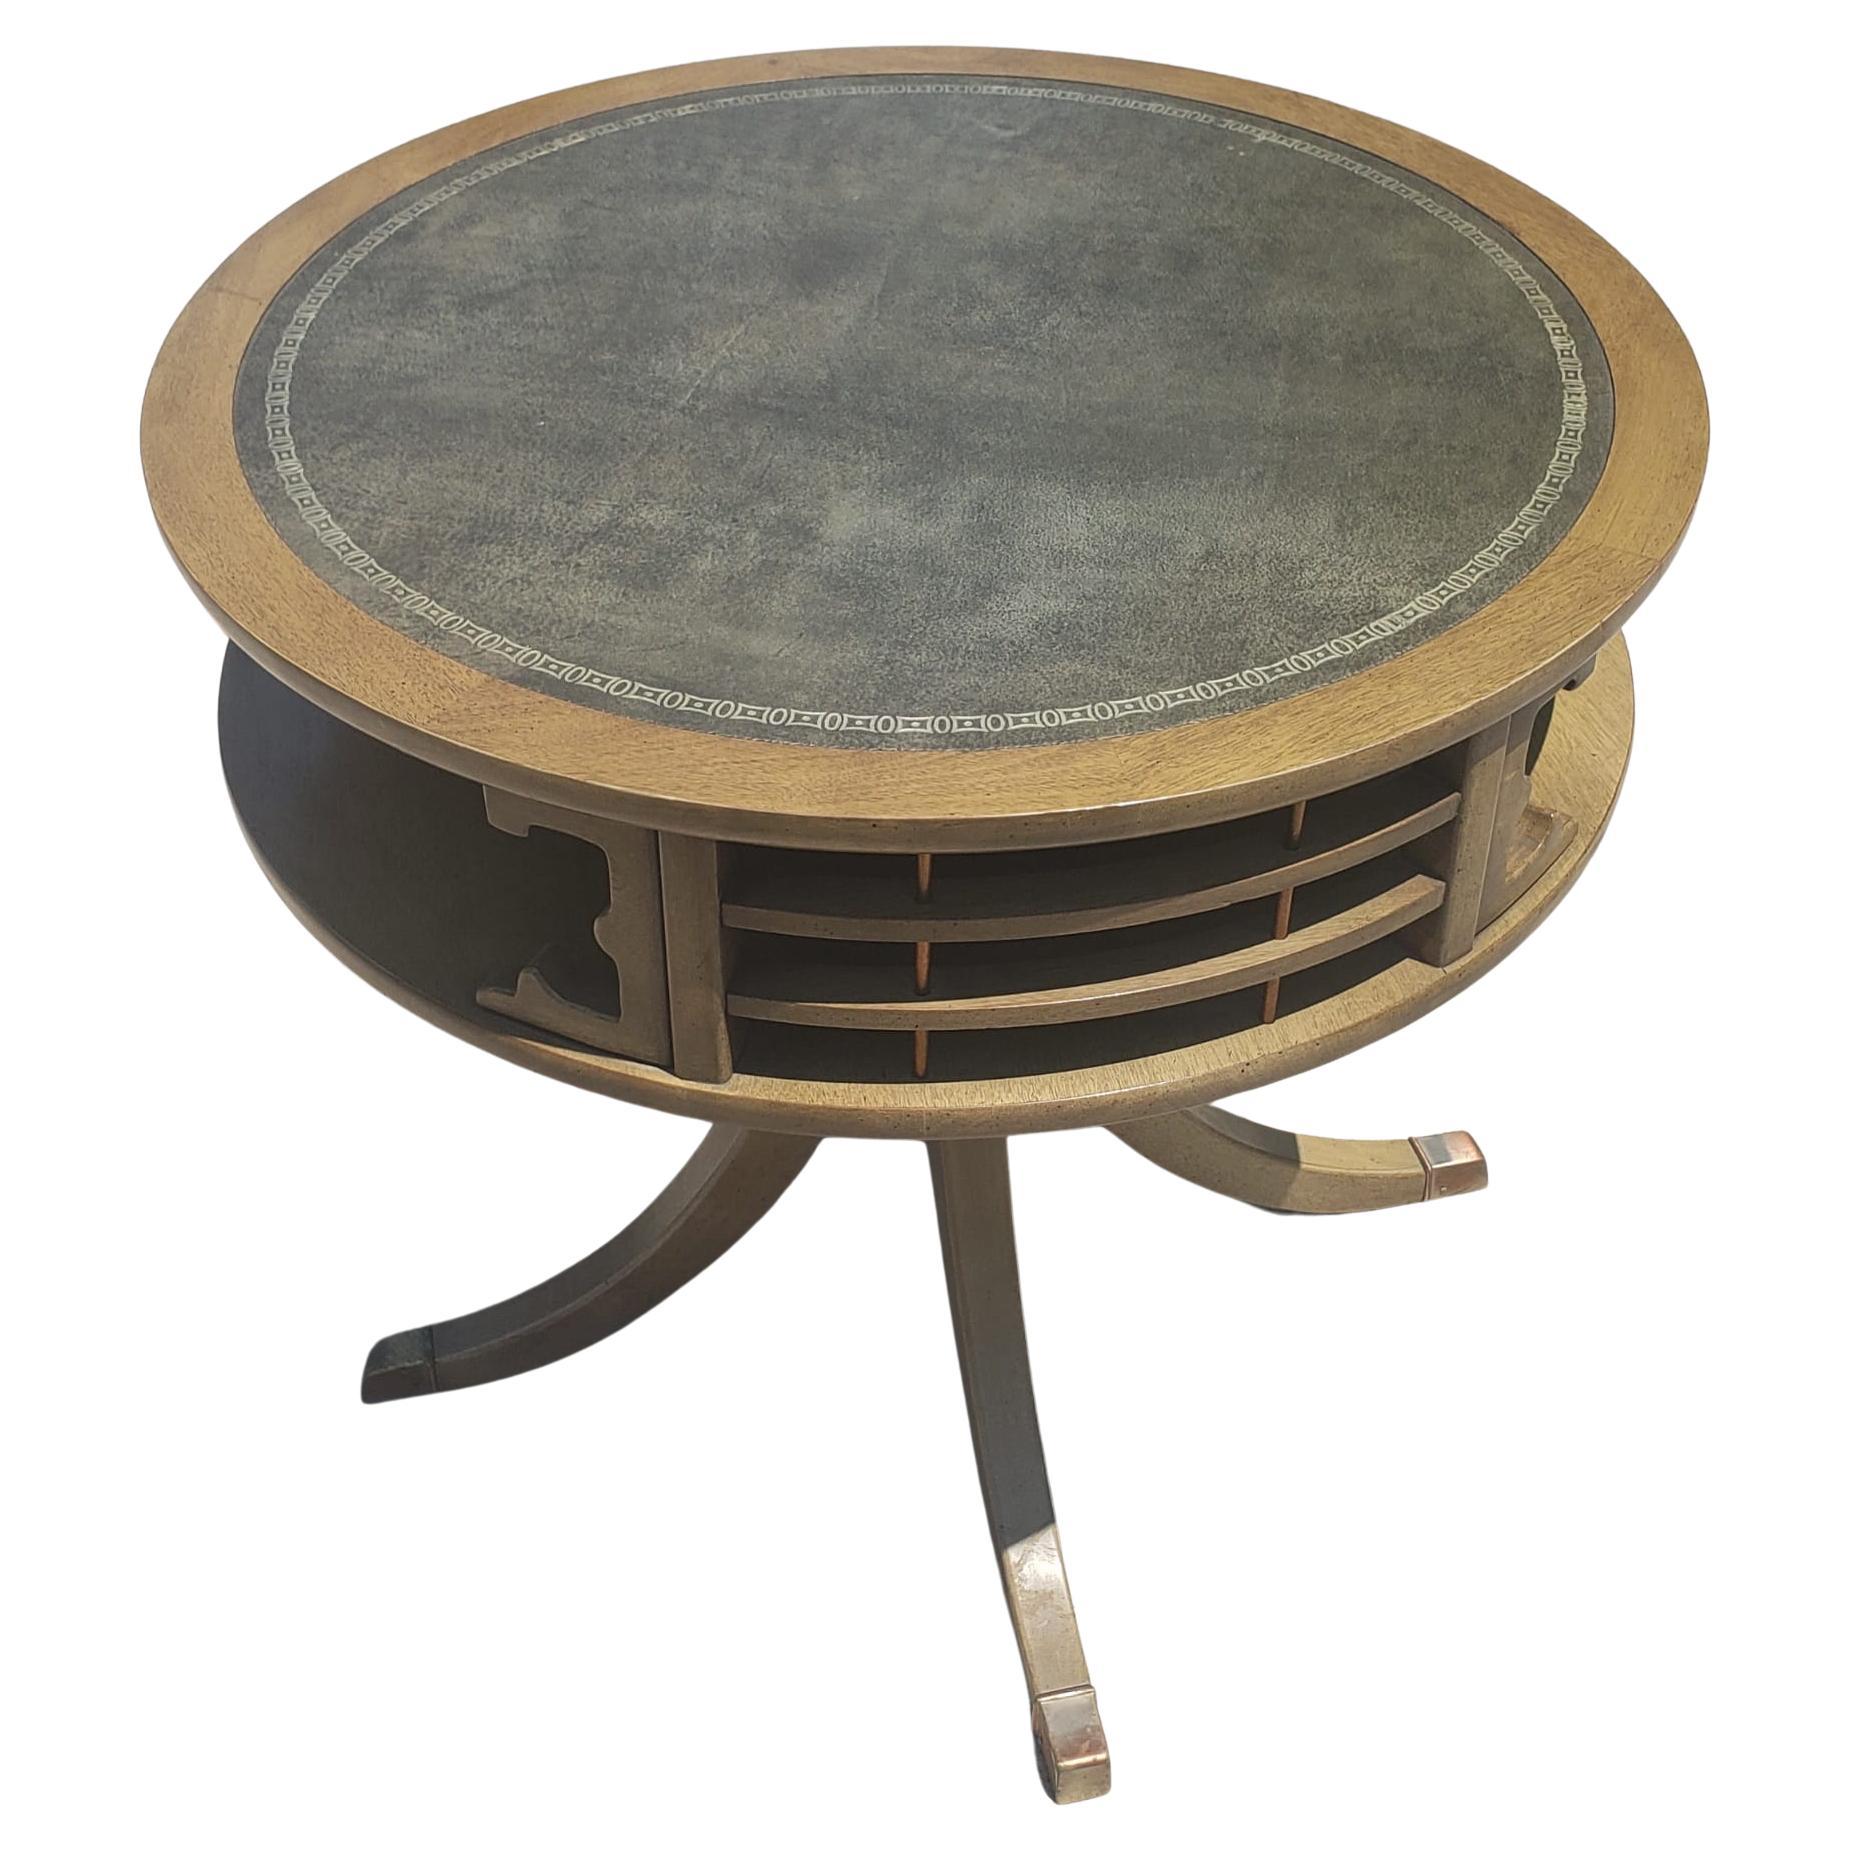 American Mid-Century Two-Tier Quad Pad Pedestal Drum Table with Stenciled Leather Top For Sale